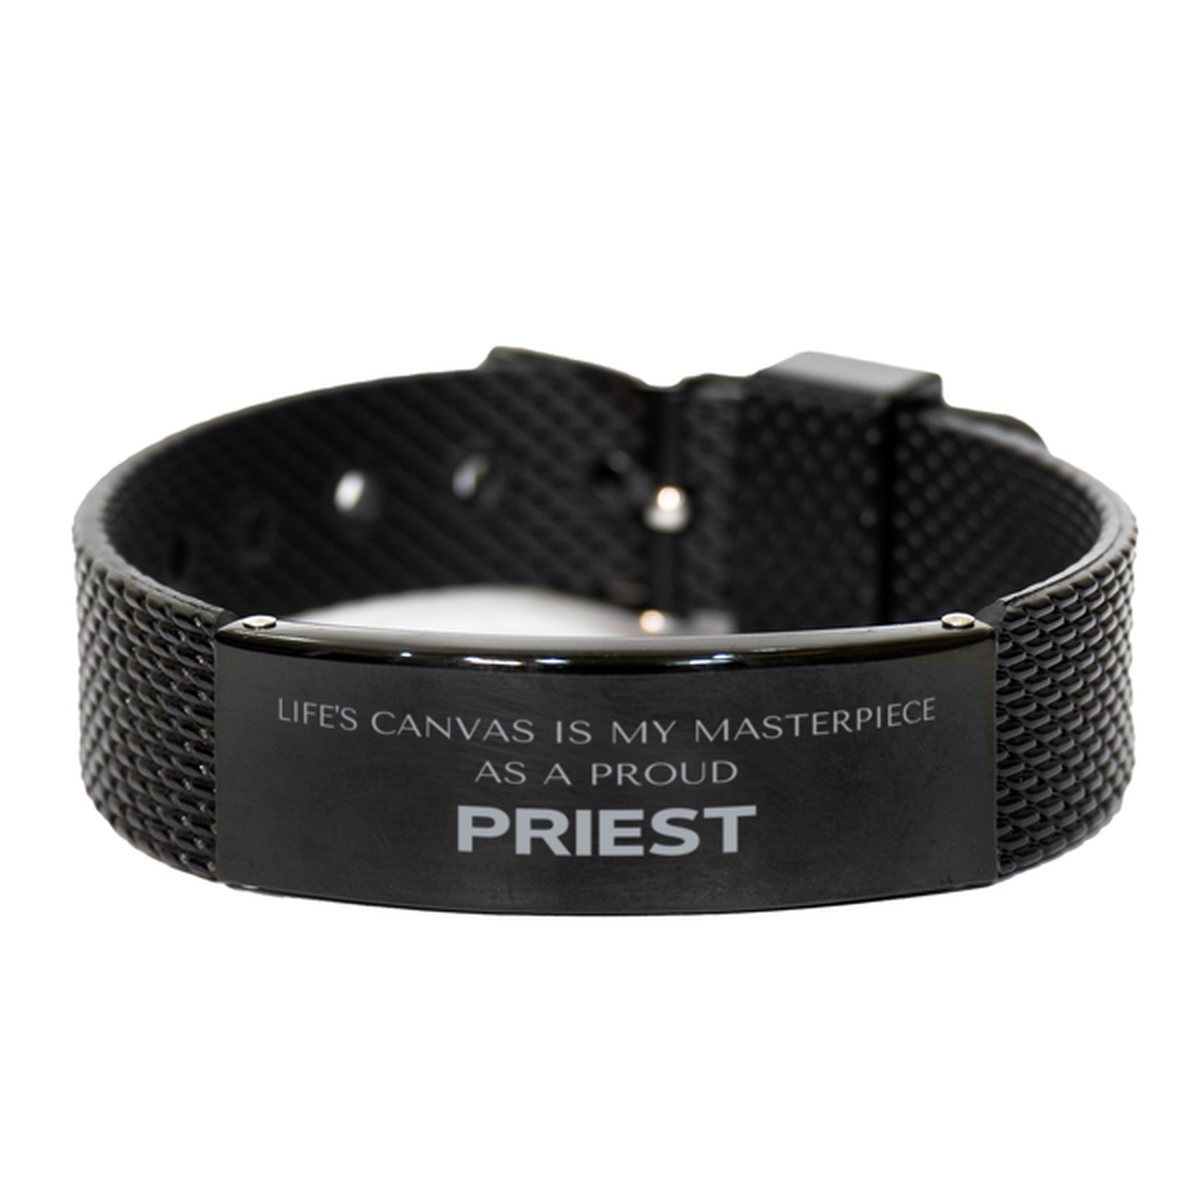 Proud Priest Gifts, Life's canvas is my masterpiece, Epic Birthday Christmas Unique Black Shark Mesh Bracelet For Priest, Coworkers, Men, Women, Friends